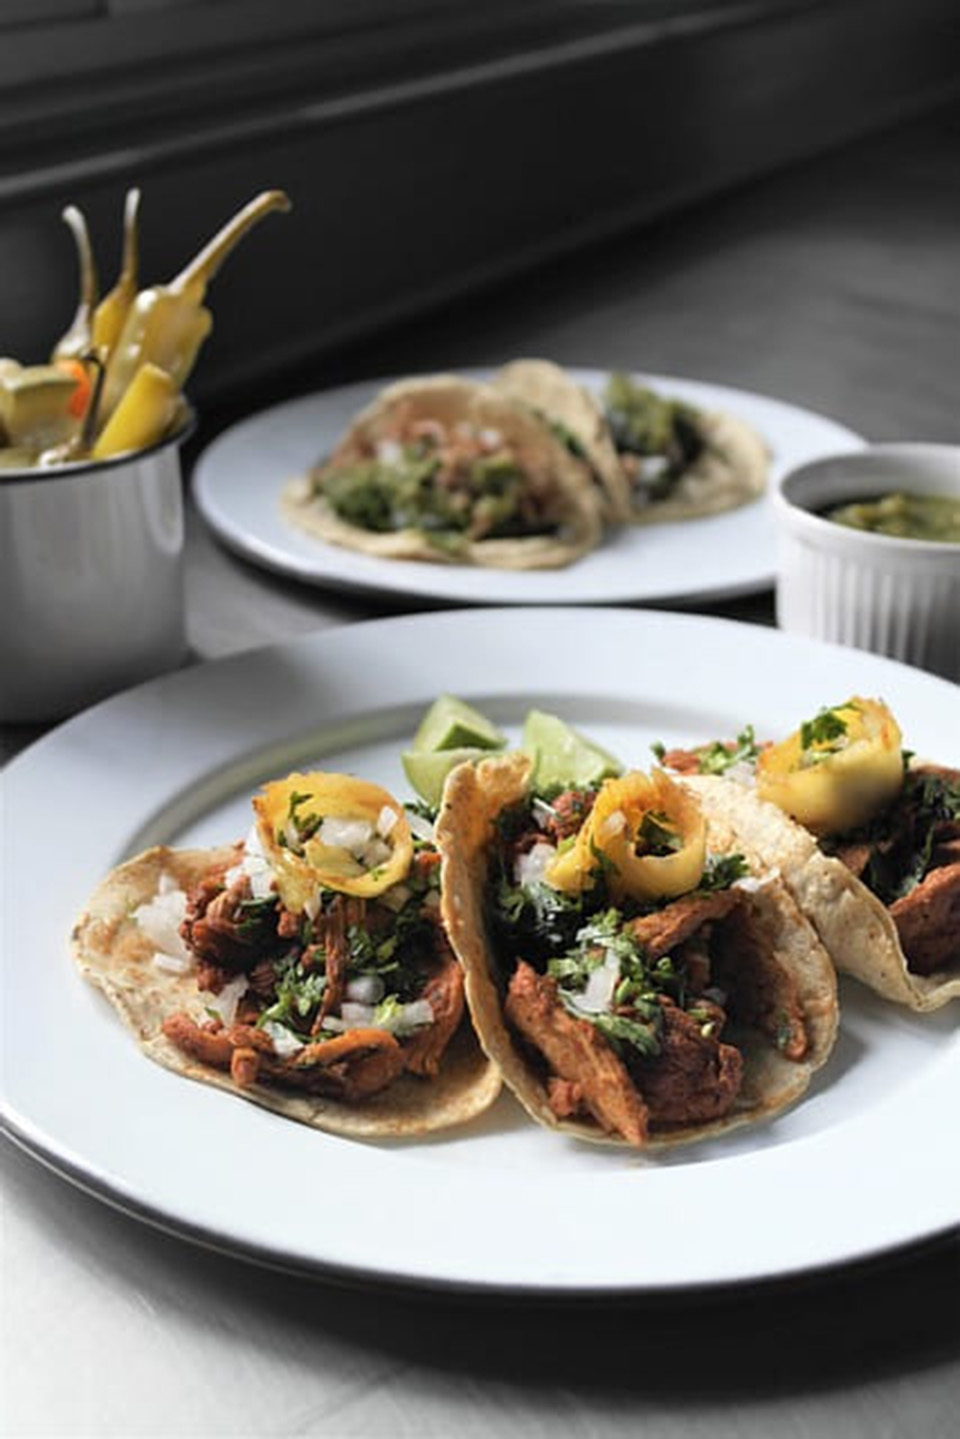 Eat tacos to your heart's content at these spots